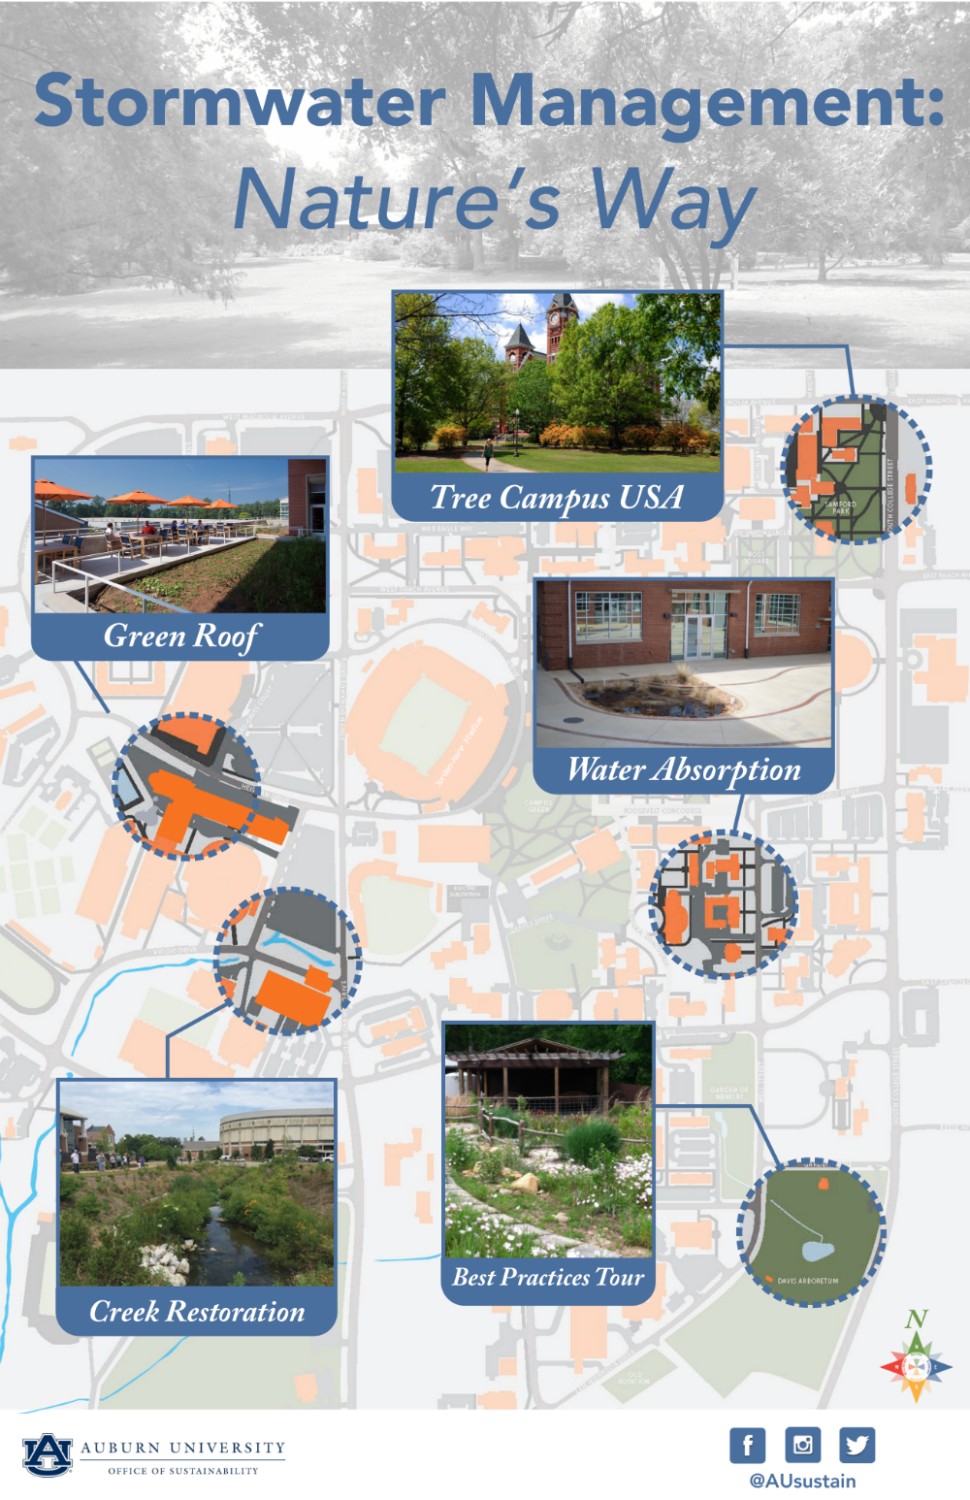 Graphic identifying locations on campus with best practices in stormwater management.